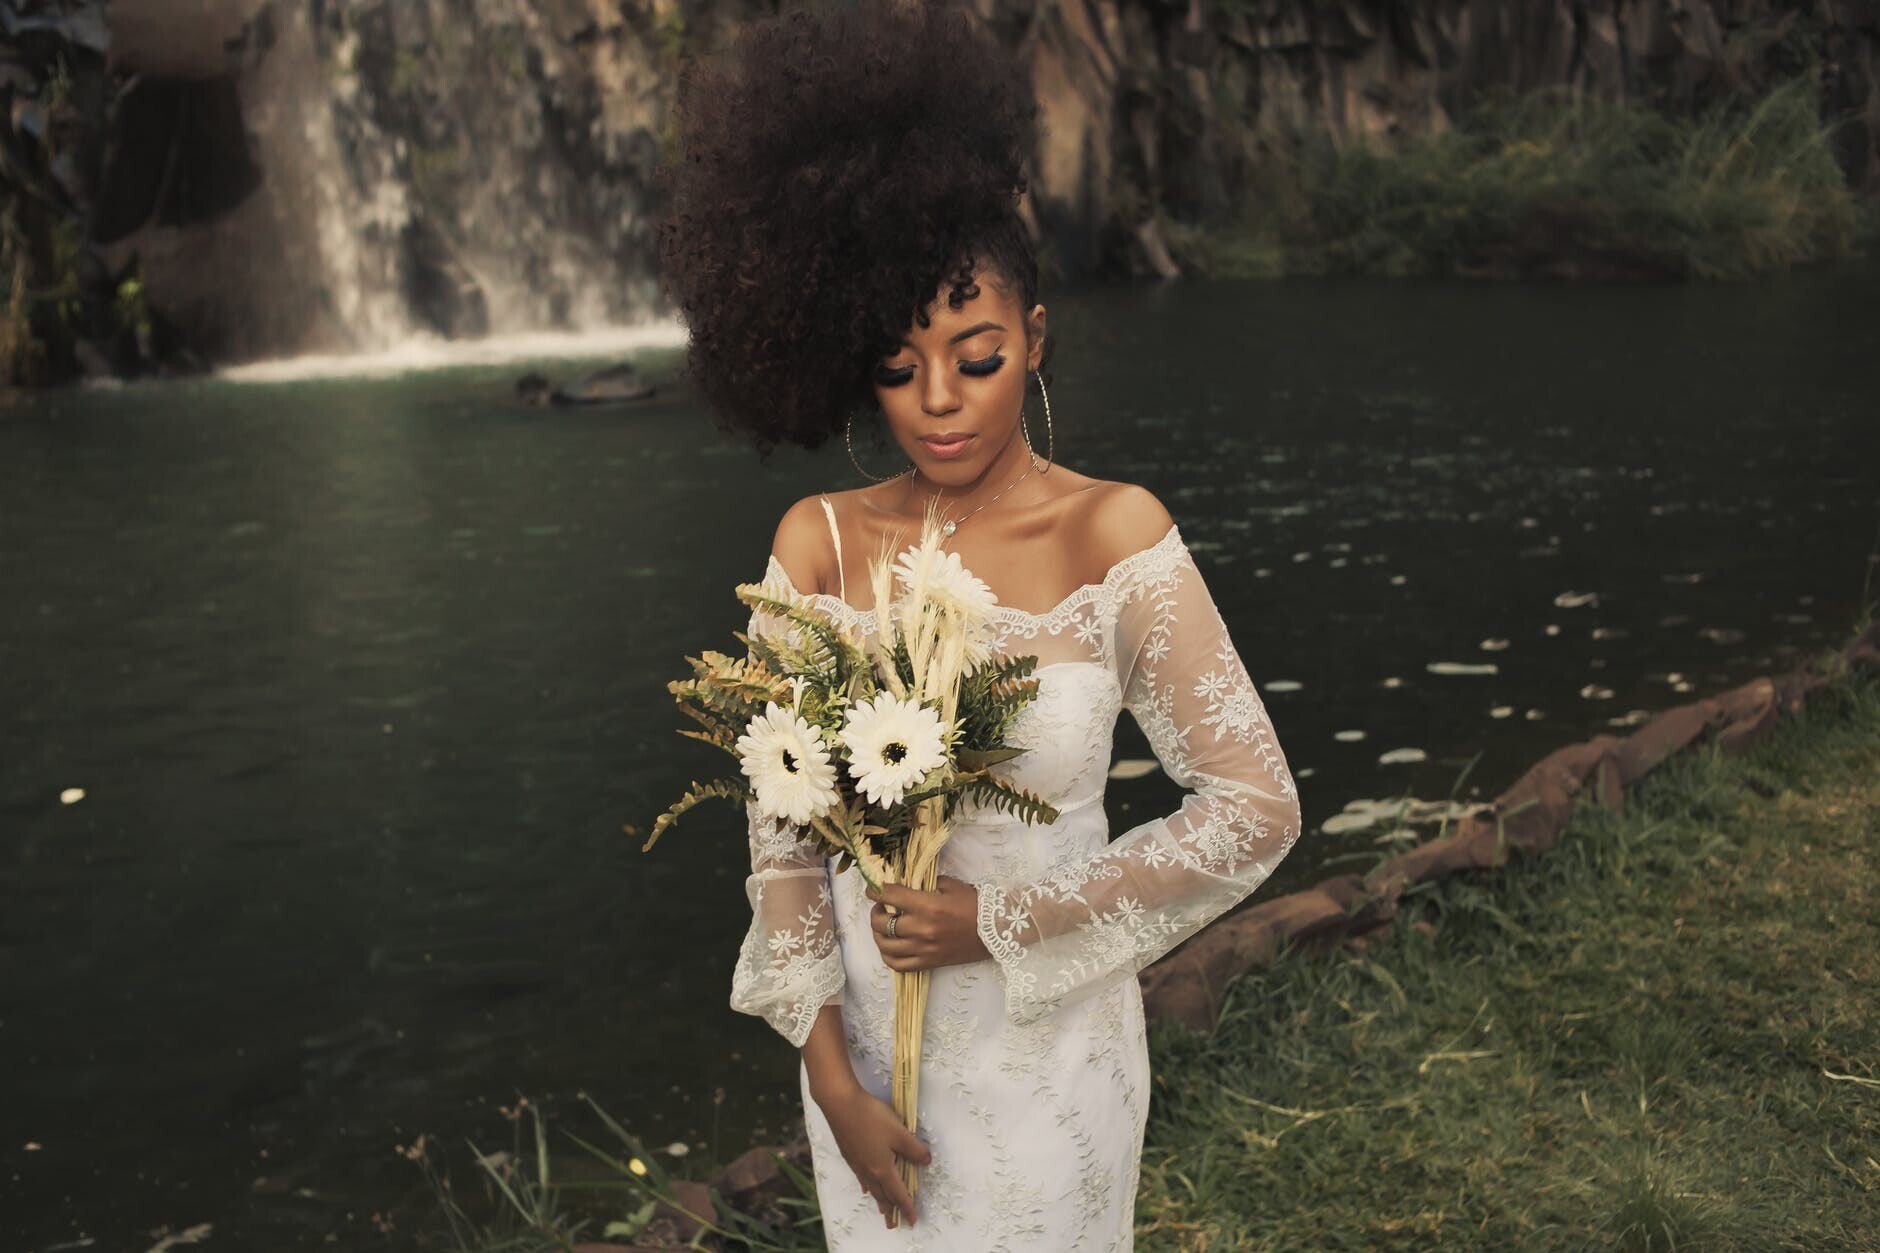 Marrying a Dominican Woman - How to Find the Perfect Bride?